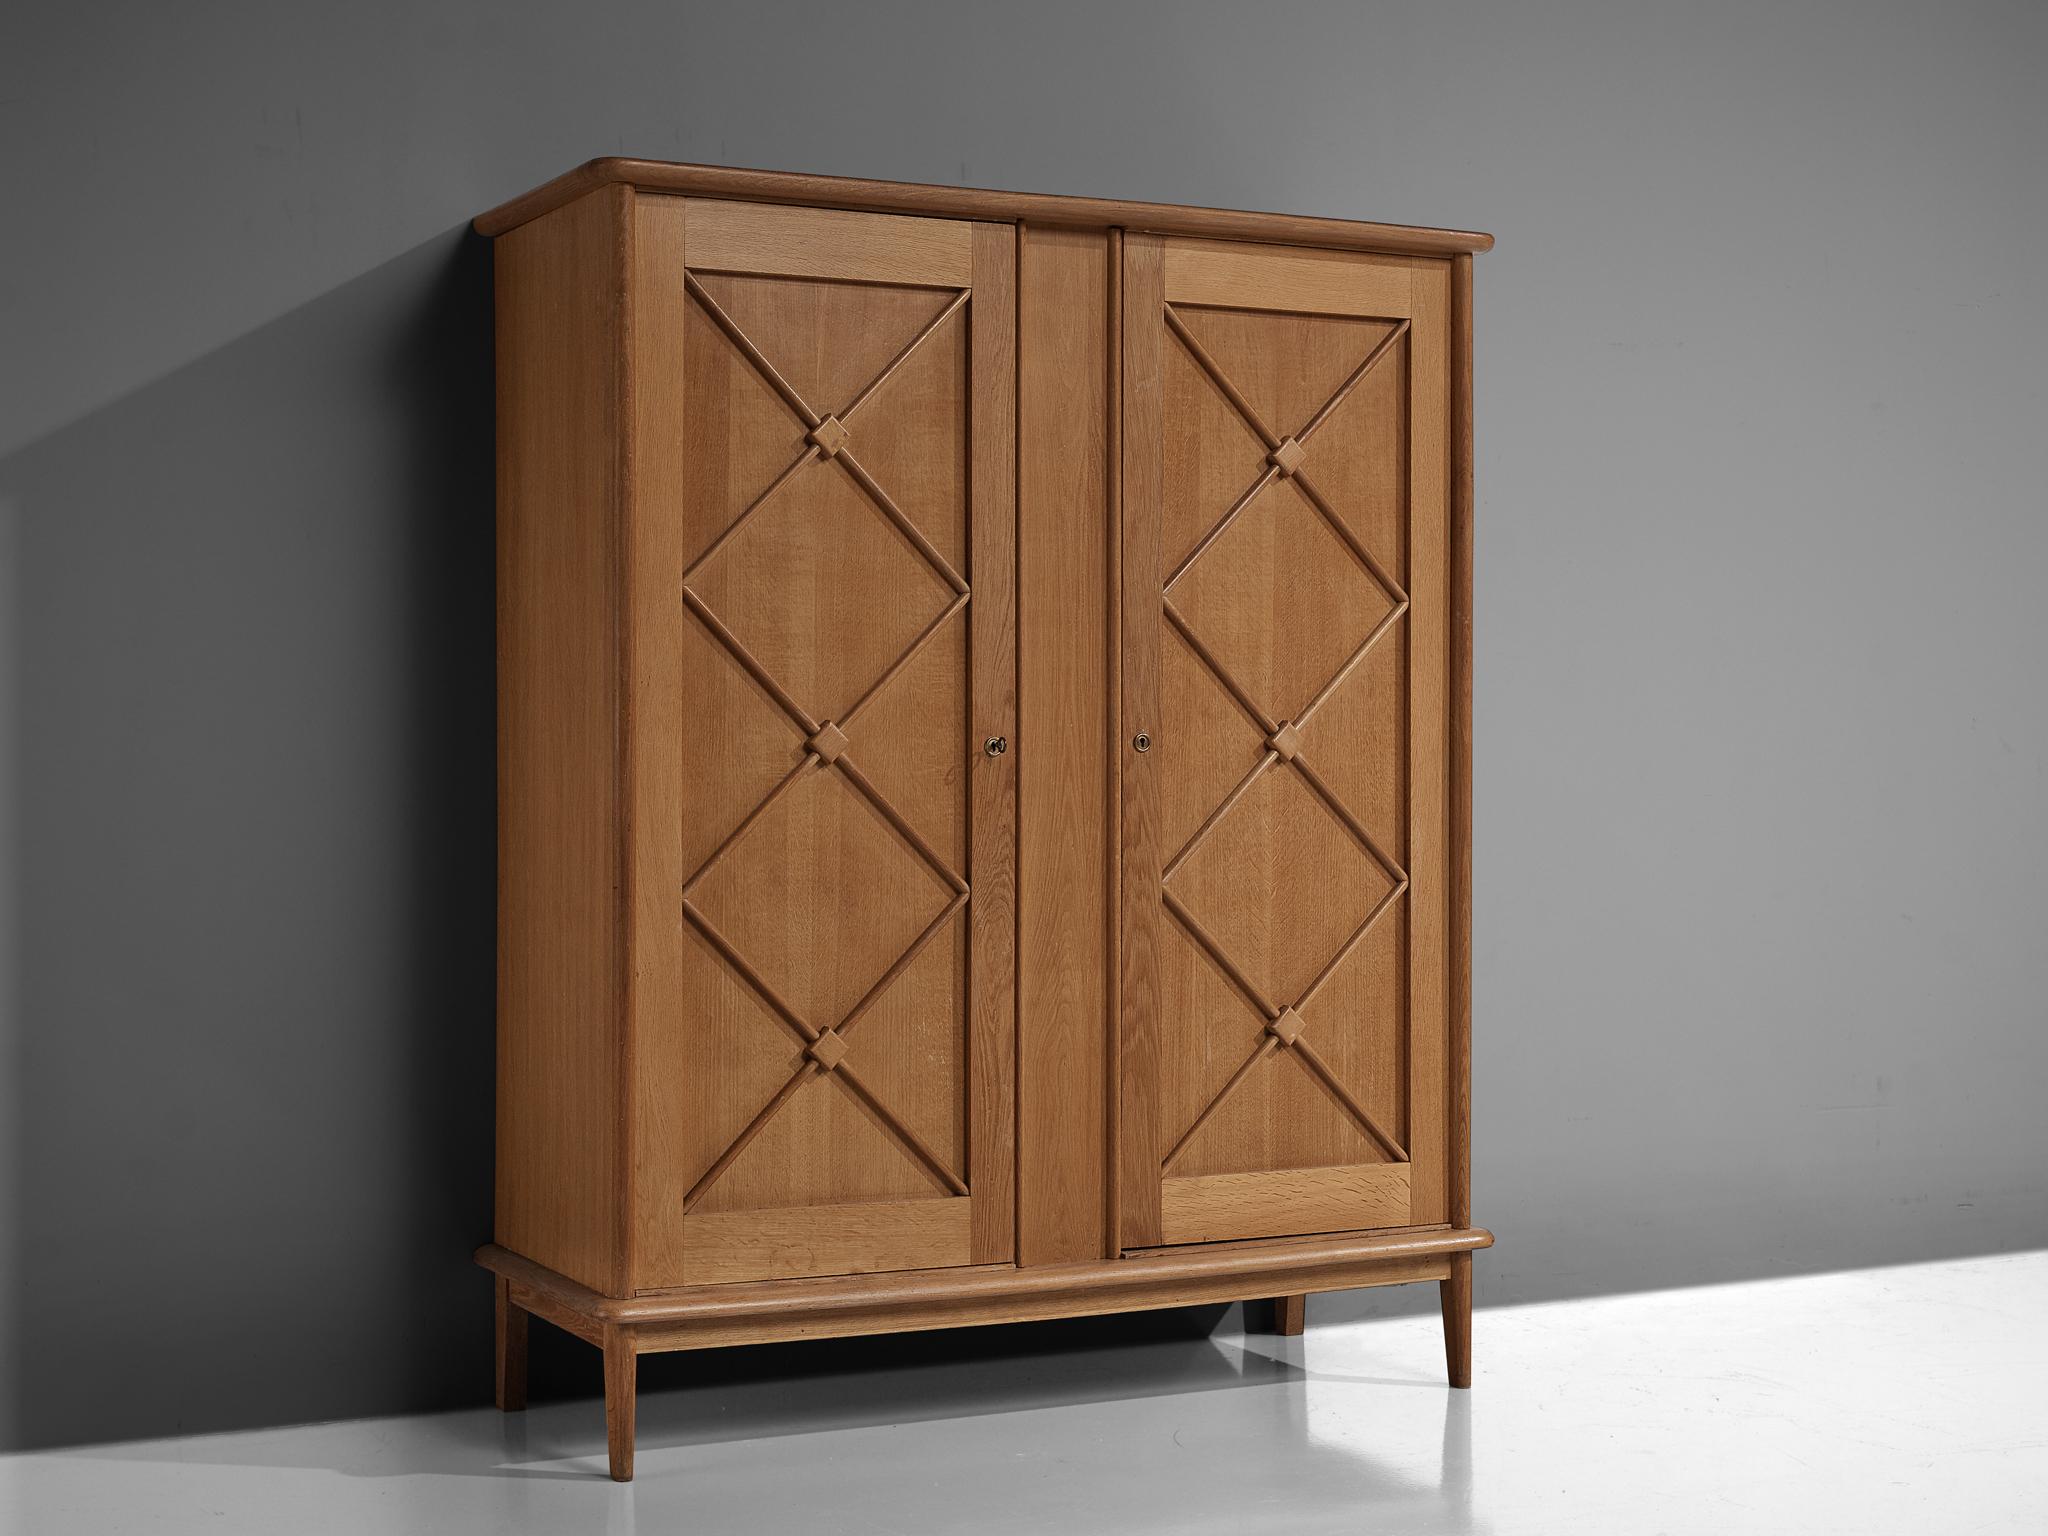 Cabinet, oak, France, 1960s

An elegant case piece in oak that features geometric details in the doors. The high board is lifted from the ground by slim, conical legs that give the solid looking body a more airy appearance. The cabinet offers